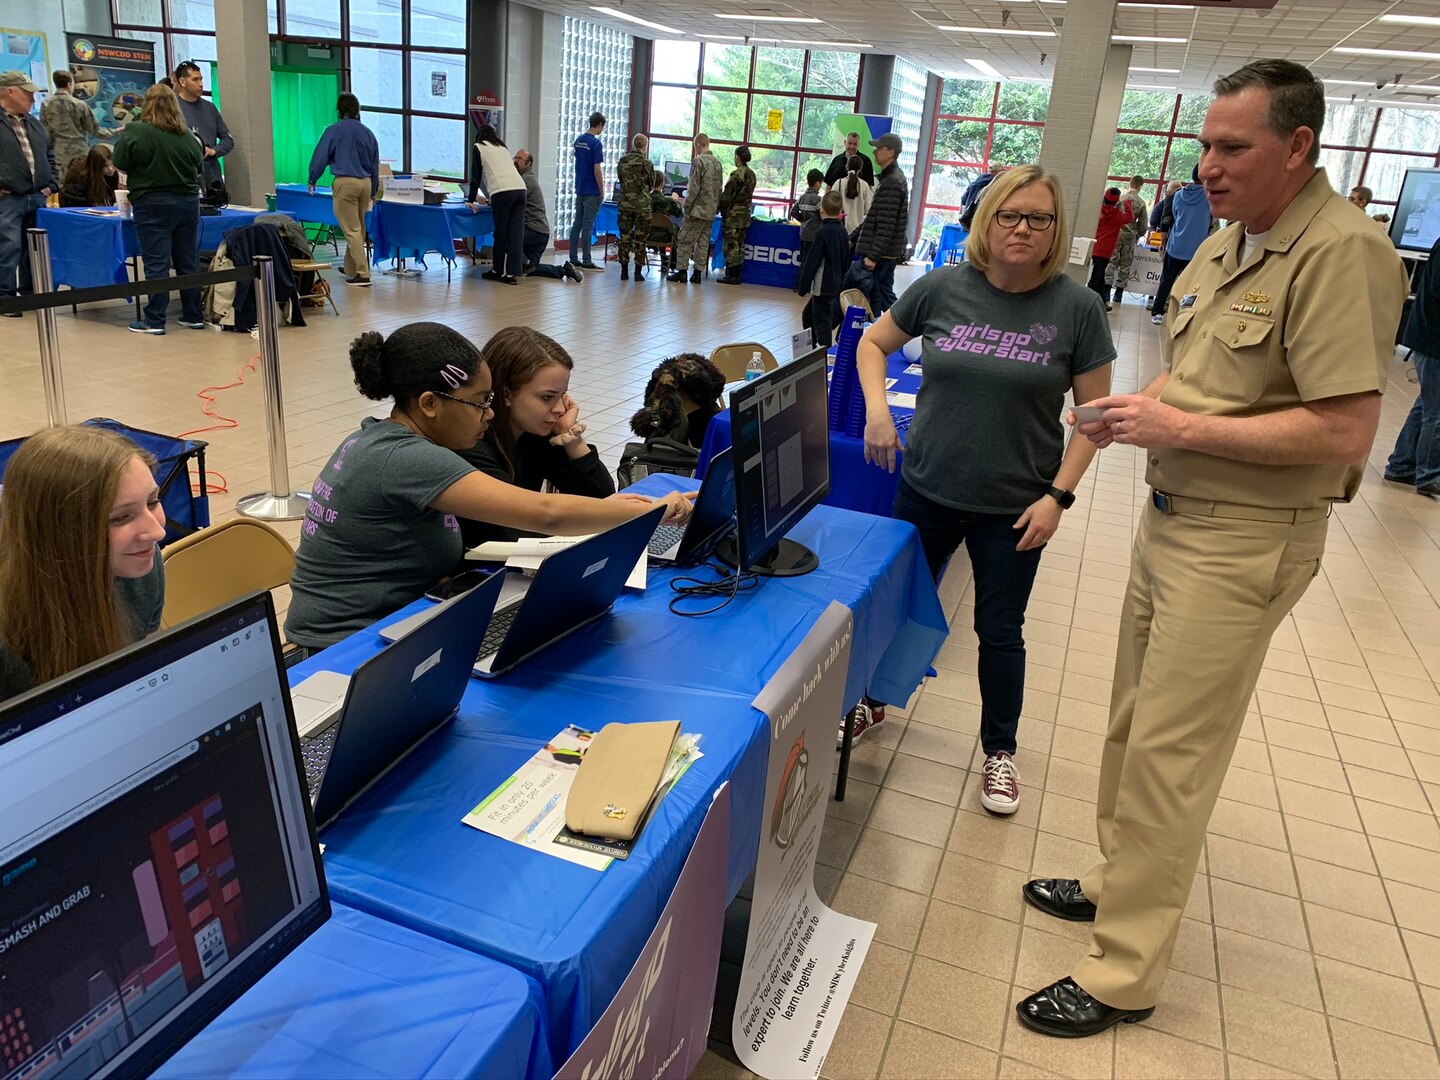 IMAGE: SPOTSYLVANIA, Va. (Feb. 29, 2020) – Capt. Casey Plew, Naval Surface Warfare Center Dahlgren Division (NSWCDD) commanding officer, talks with 
members of the Spotsylvania High School’s Girls Go CyberStart group at the annual science, technology, engineering, mathematics (STEM) Summit hosted by Chancellor High School. Plew was among the NSWCDD leaders, scientists and engineers who joined a myriad of organizations to engage students with science, technology, engineering, mathematics (STEM) demonstrations. “By the end of Girls Go CyberStart, students will have delved into disciplines such as cryptography, digital forensics and open source intelligence gathering and more,” according to the organization’s website. “The program gets increasingly difficult, but the first stage is designed to be accessible to anyone to uncover hidden superstars with natural ability.” 
(U.S. Navy photo/Released)